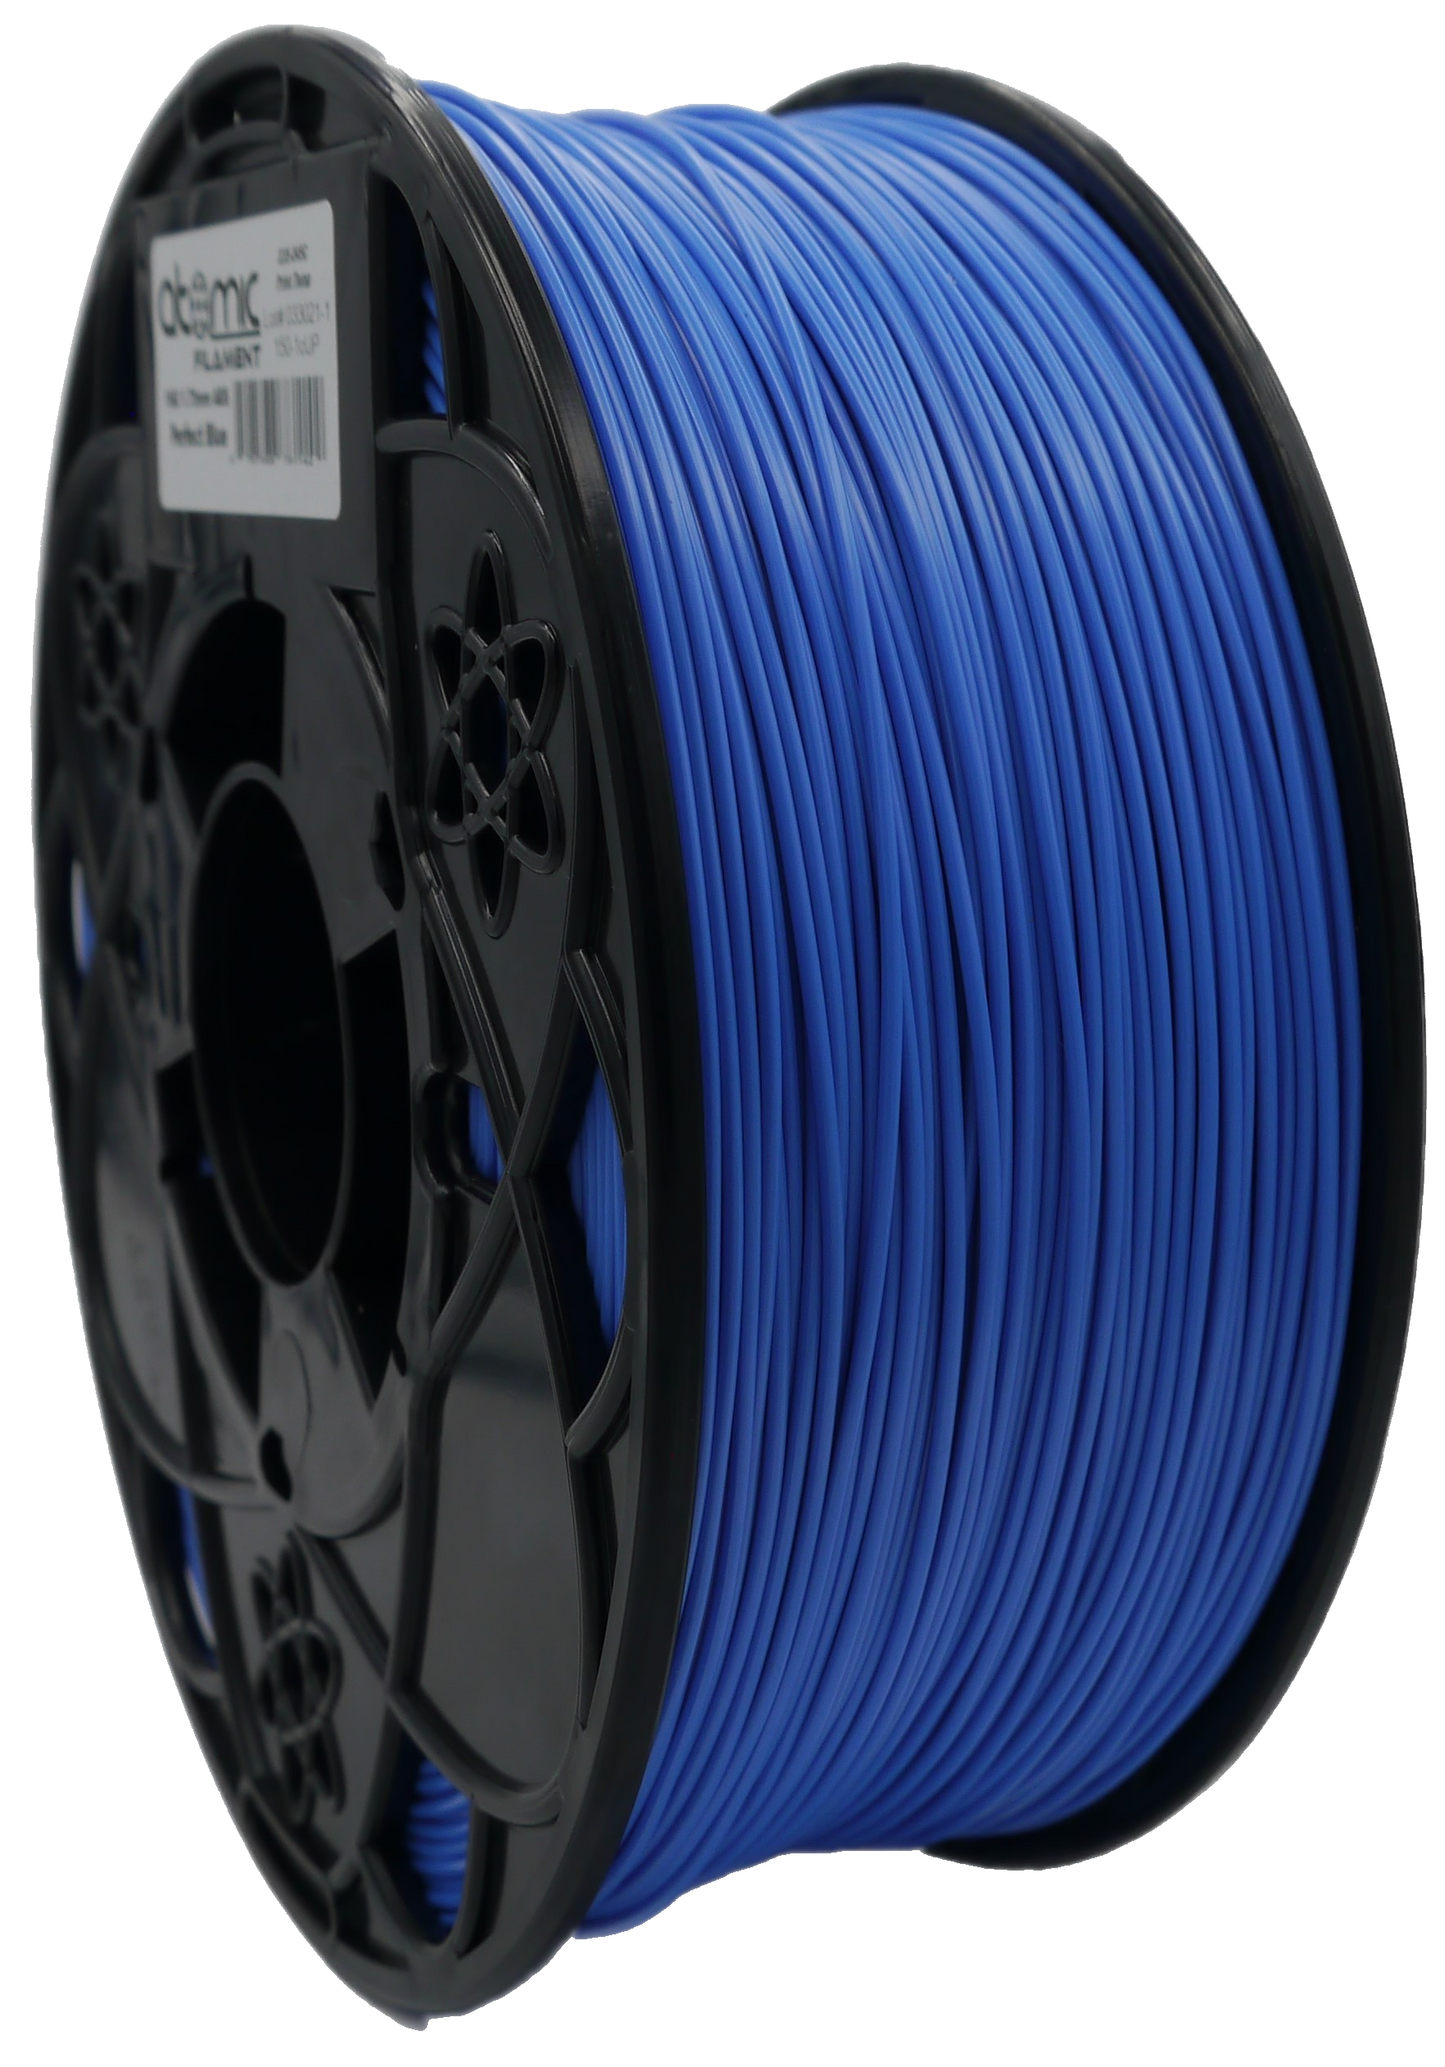 Perfect Blue ABS Filament